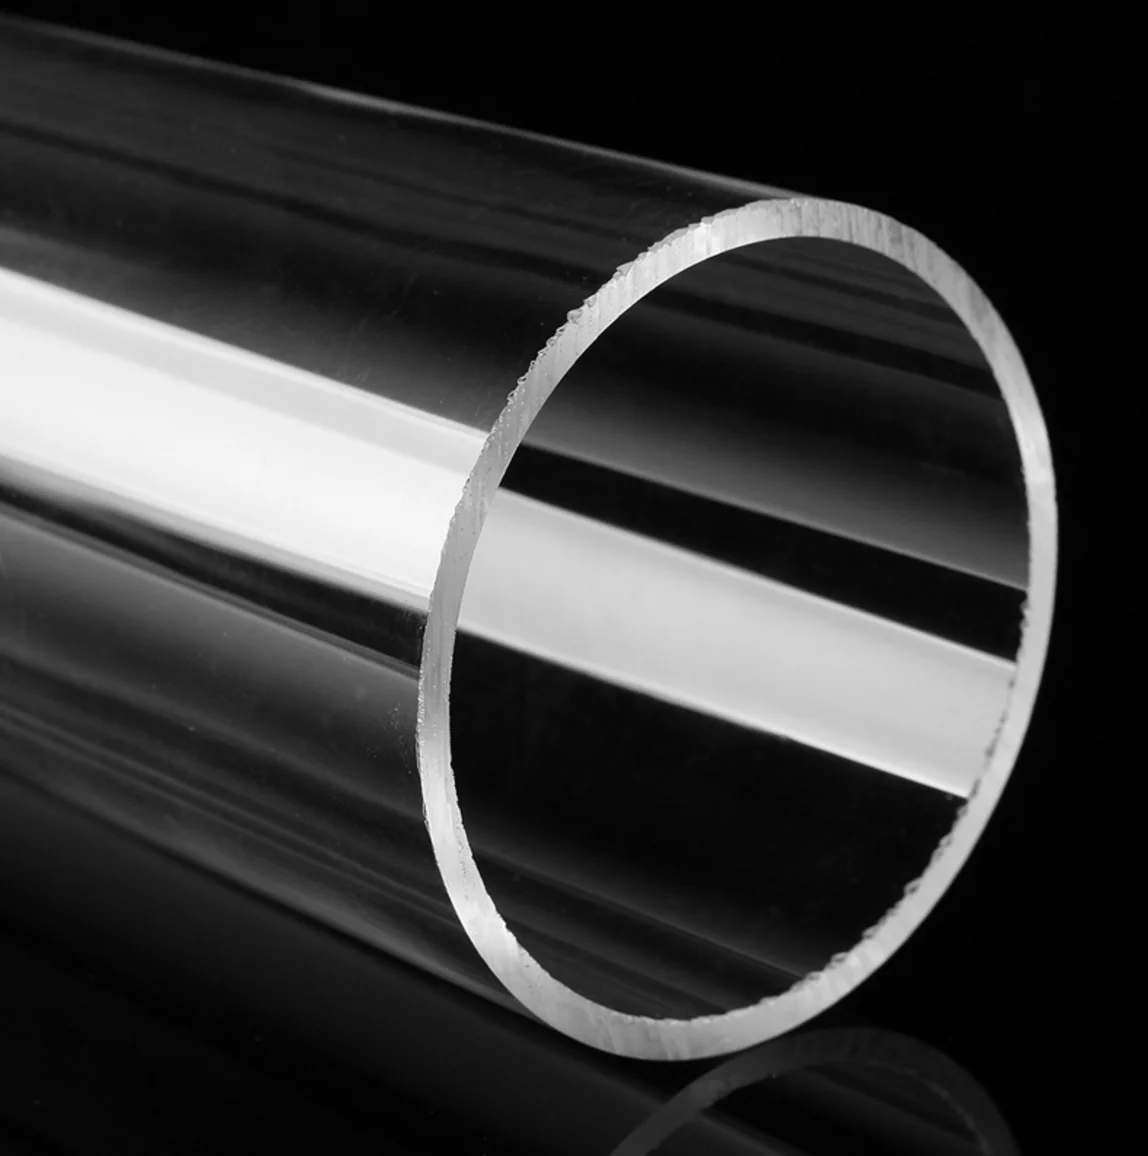 

Acrylic tube PMMA tube Plexiglass sealed cabin tube length 500MM For Underwater Robot Remote Operated Vehic